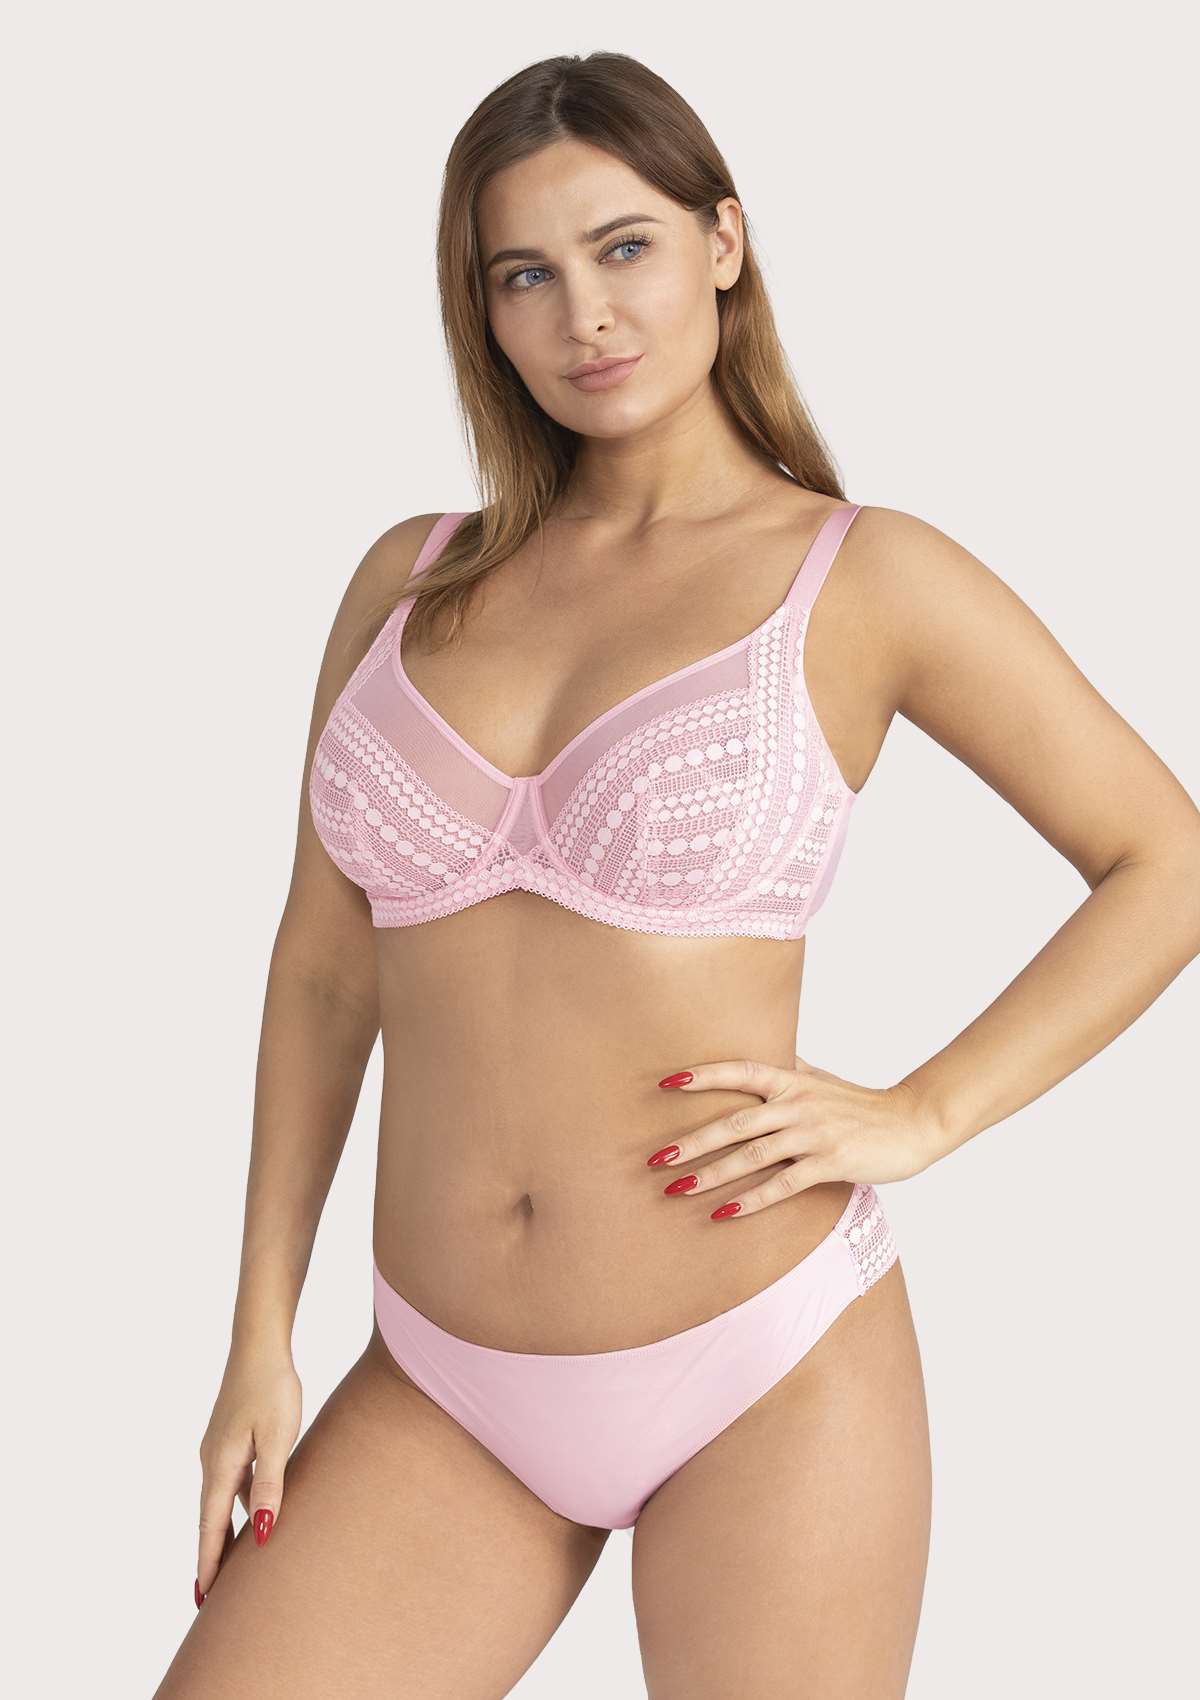 HSIA Heroine Lace Bra And Panties Set: Most Comfortable Supportive Bra - Pink / 36 / D